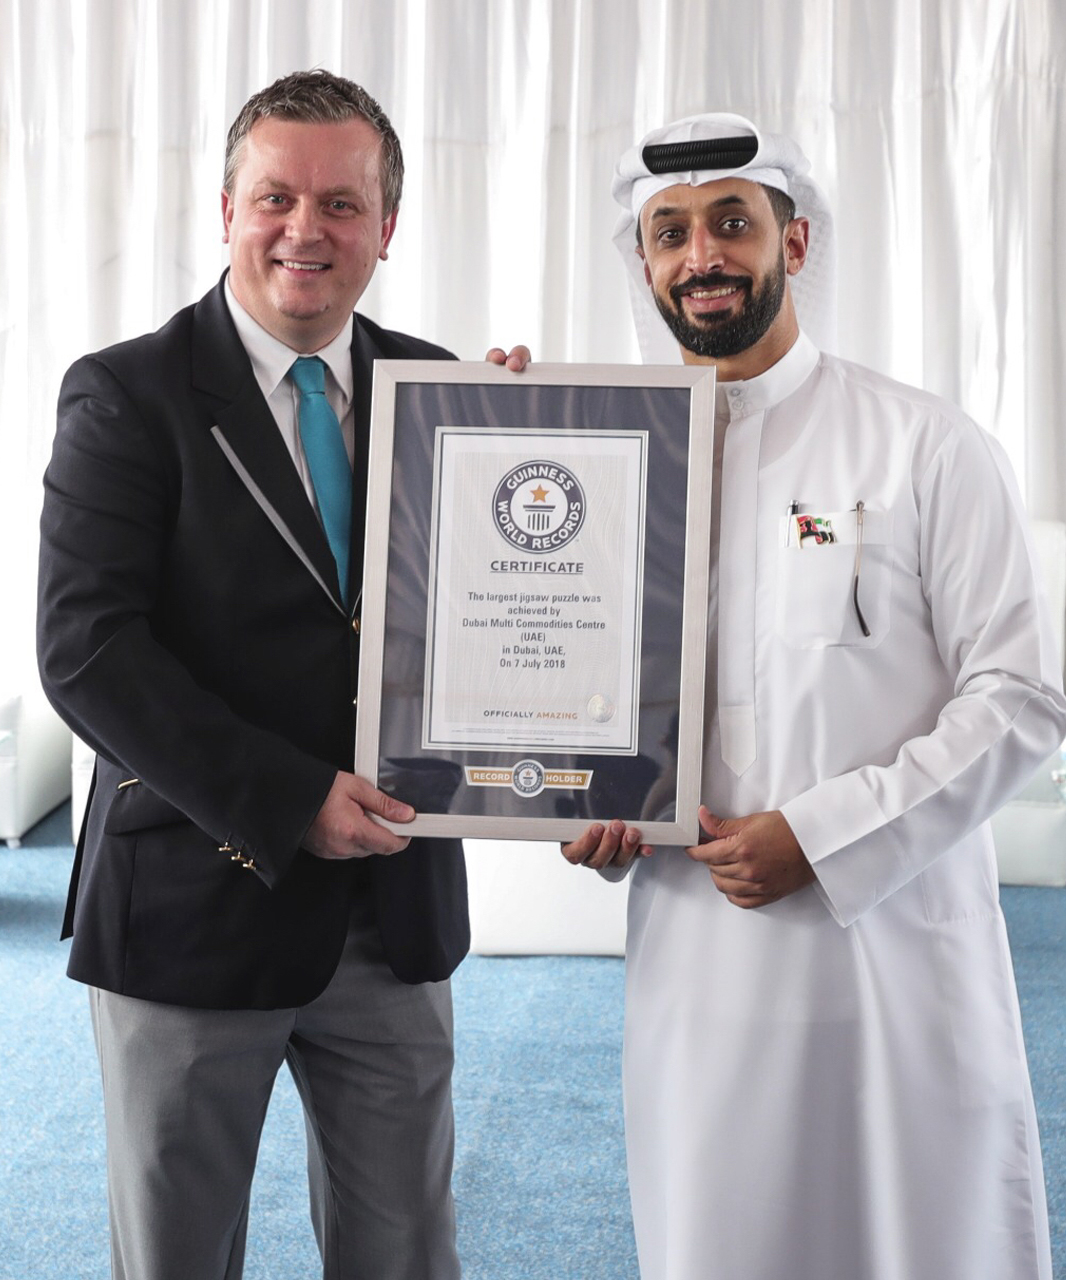 DMCC BREAKS WORLD RECORD FOR LARGEST JIGSAW PUZZLE TO CELEBRATE THE YEAR OF ZAYED